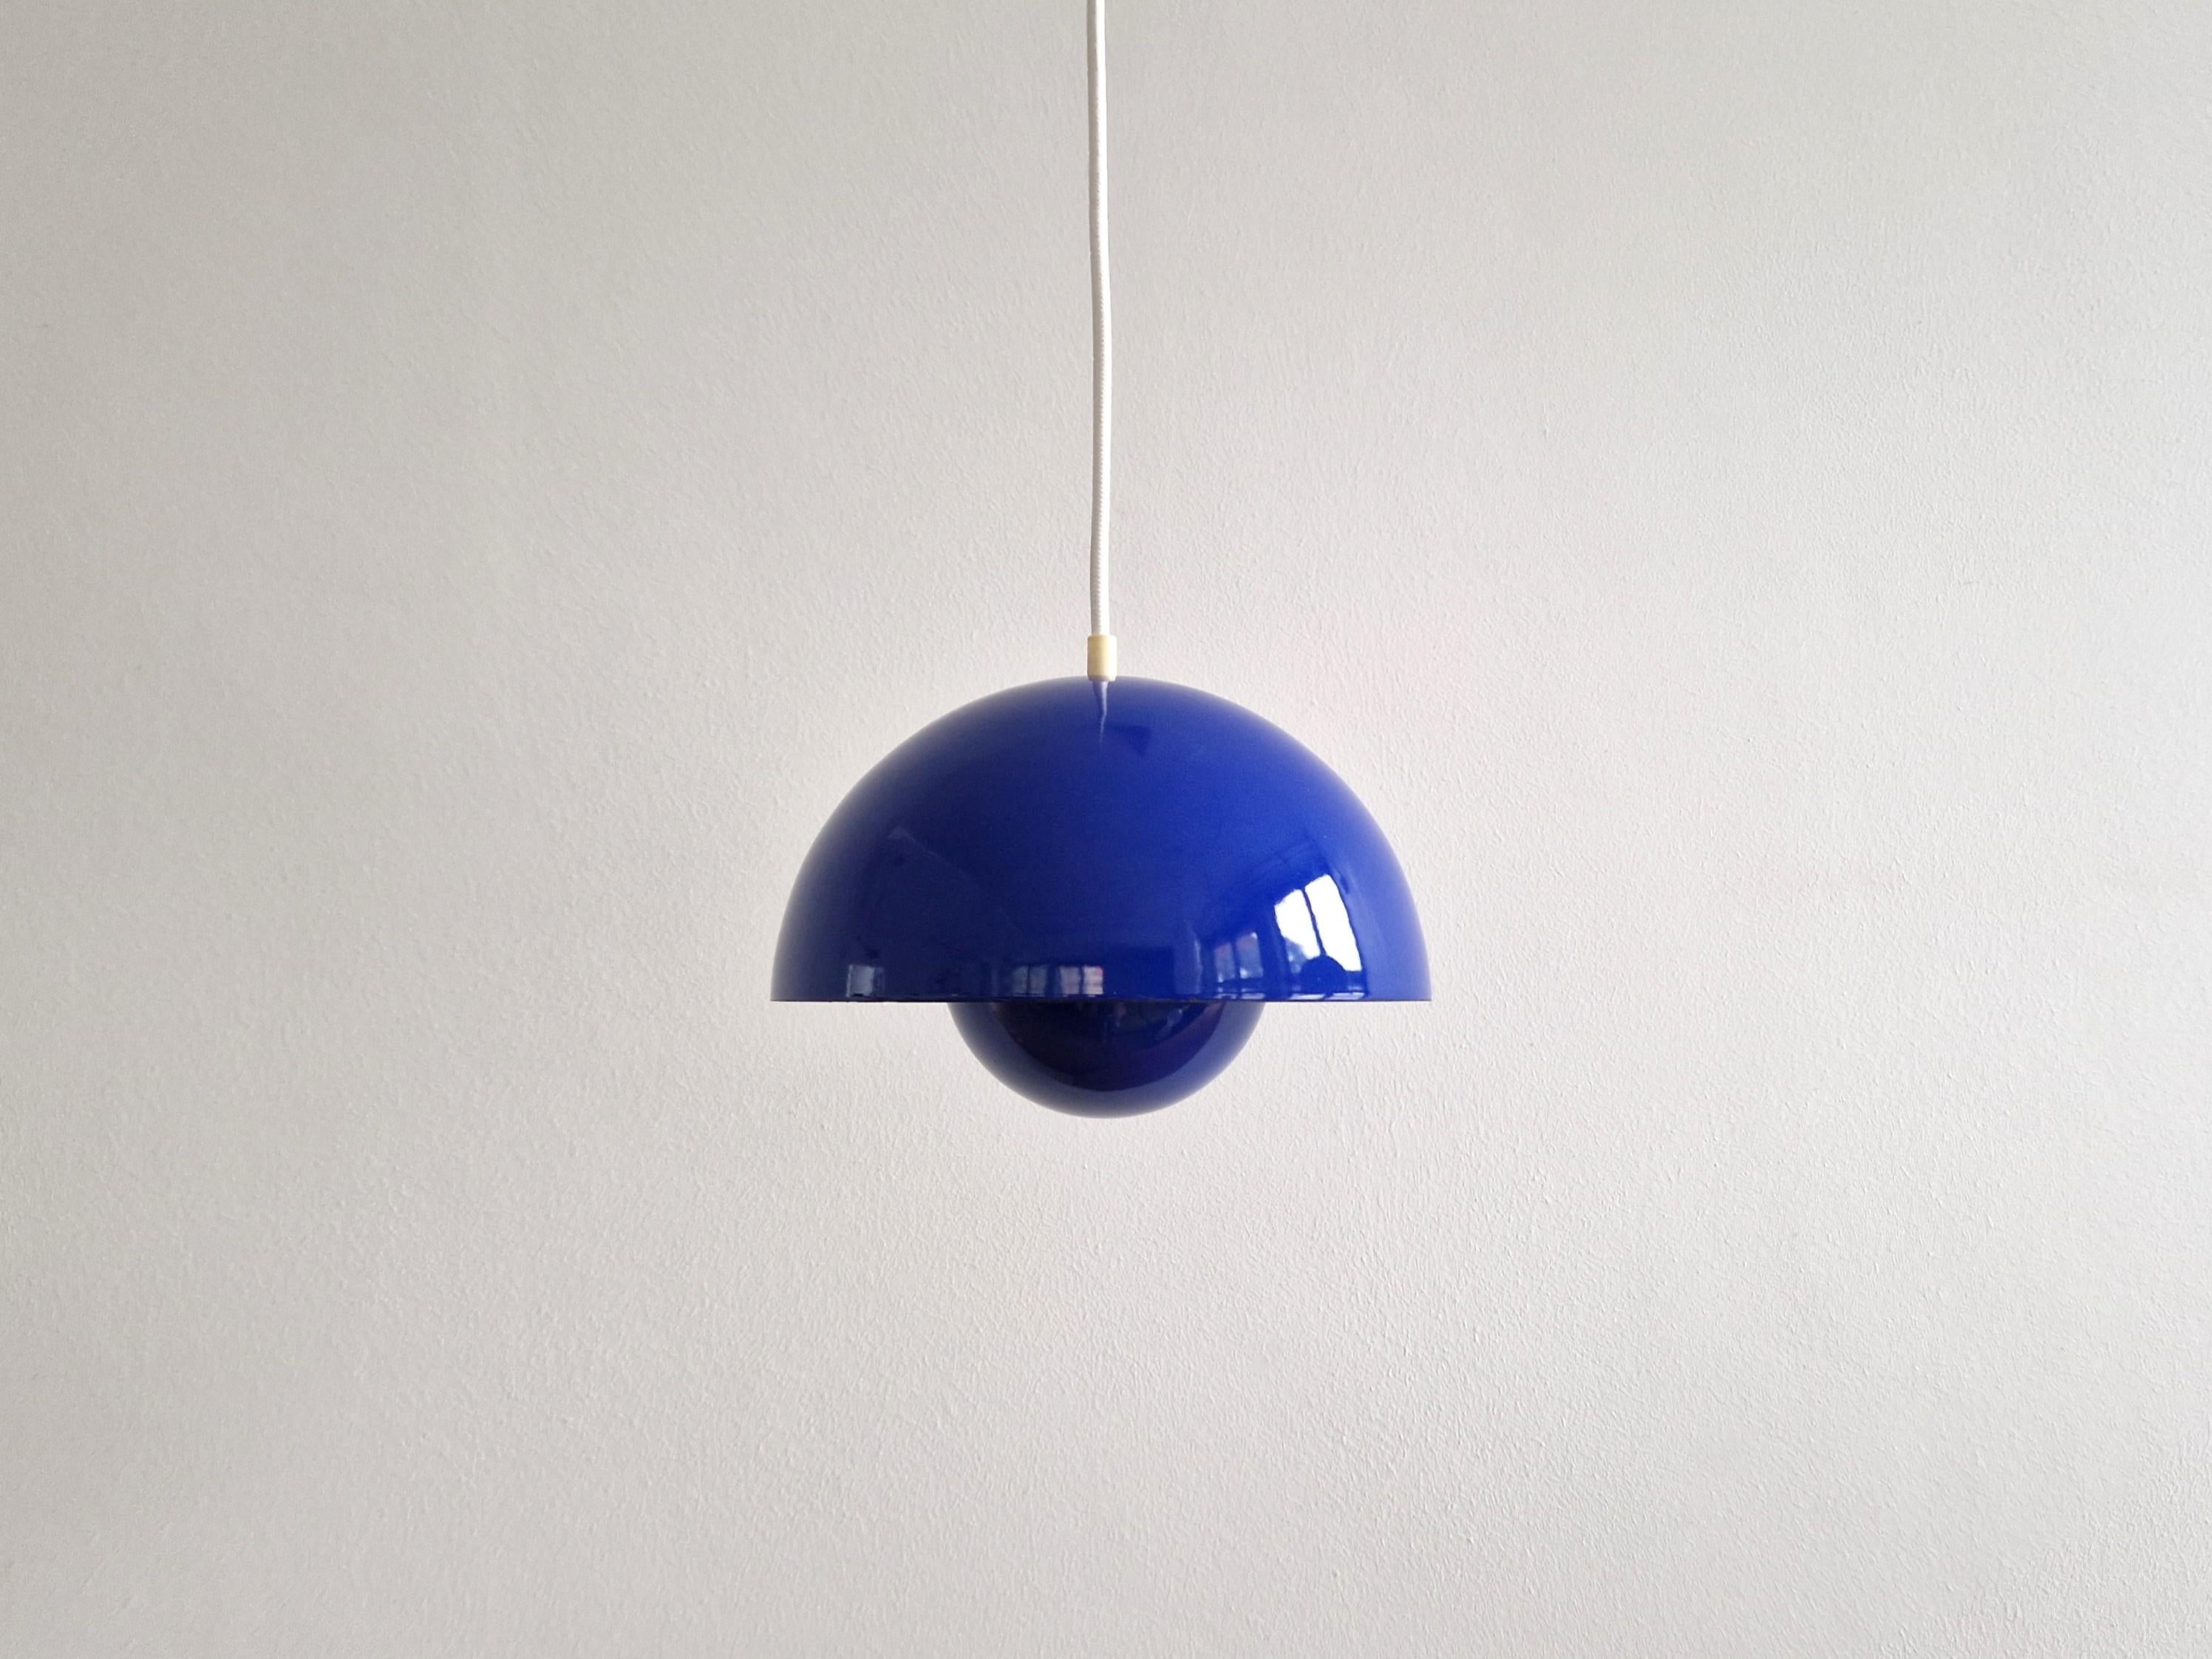 The Flowerpot pendant lamp was designed by Verner Panton for Louis Poulsen in 1968. A beautiful design classic that is still in production. This lamp is an early version and has a blue enameled finish outside and white inside. The smaller reflector